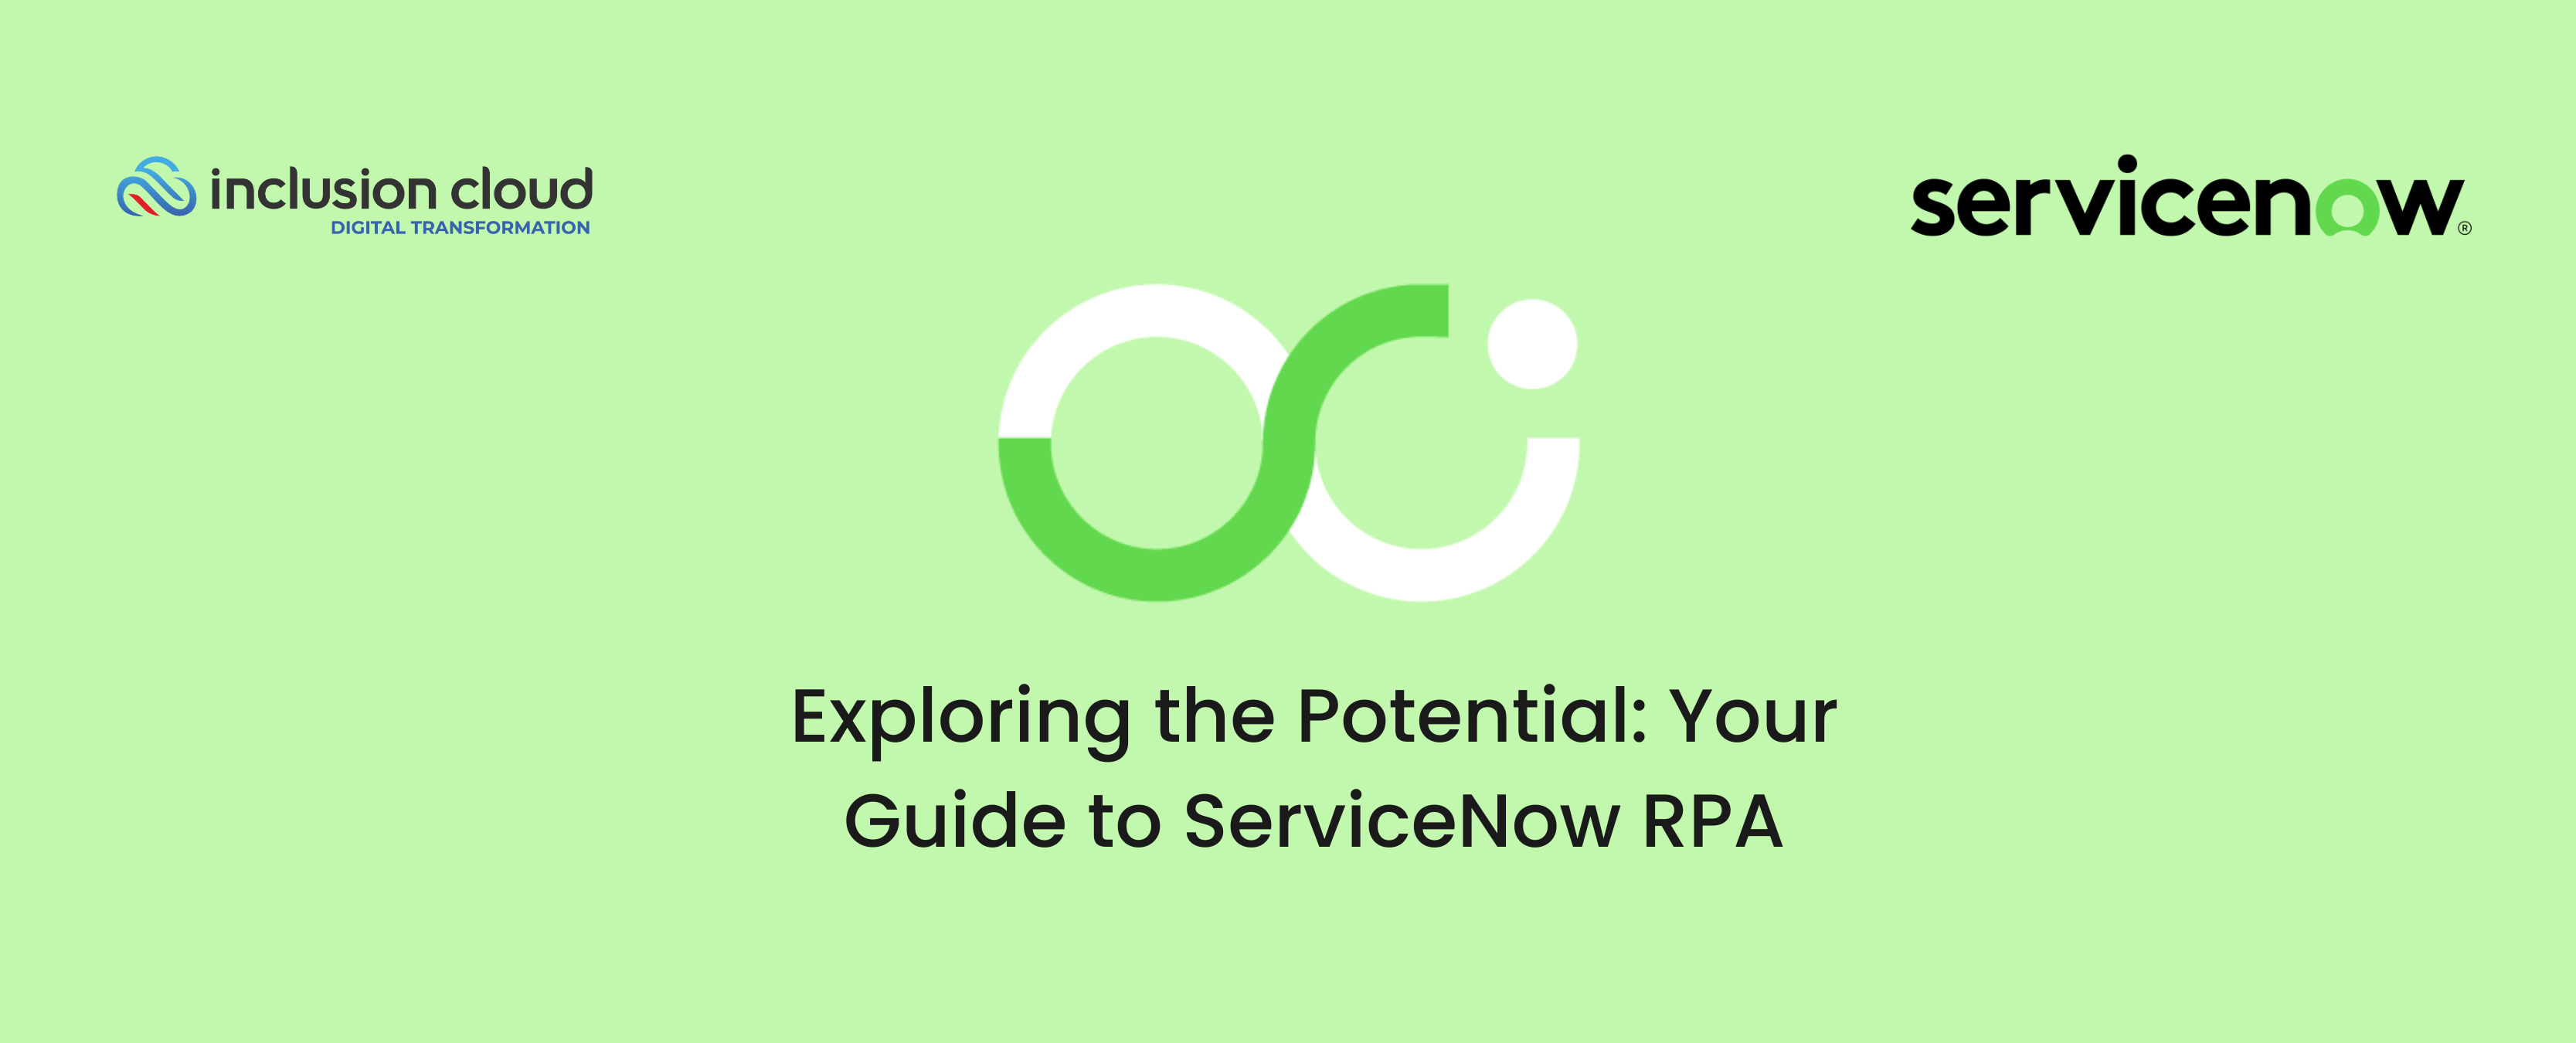 ServiceNow RPA´s